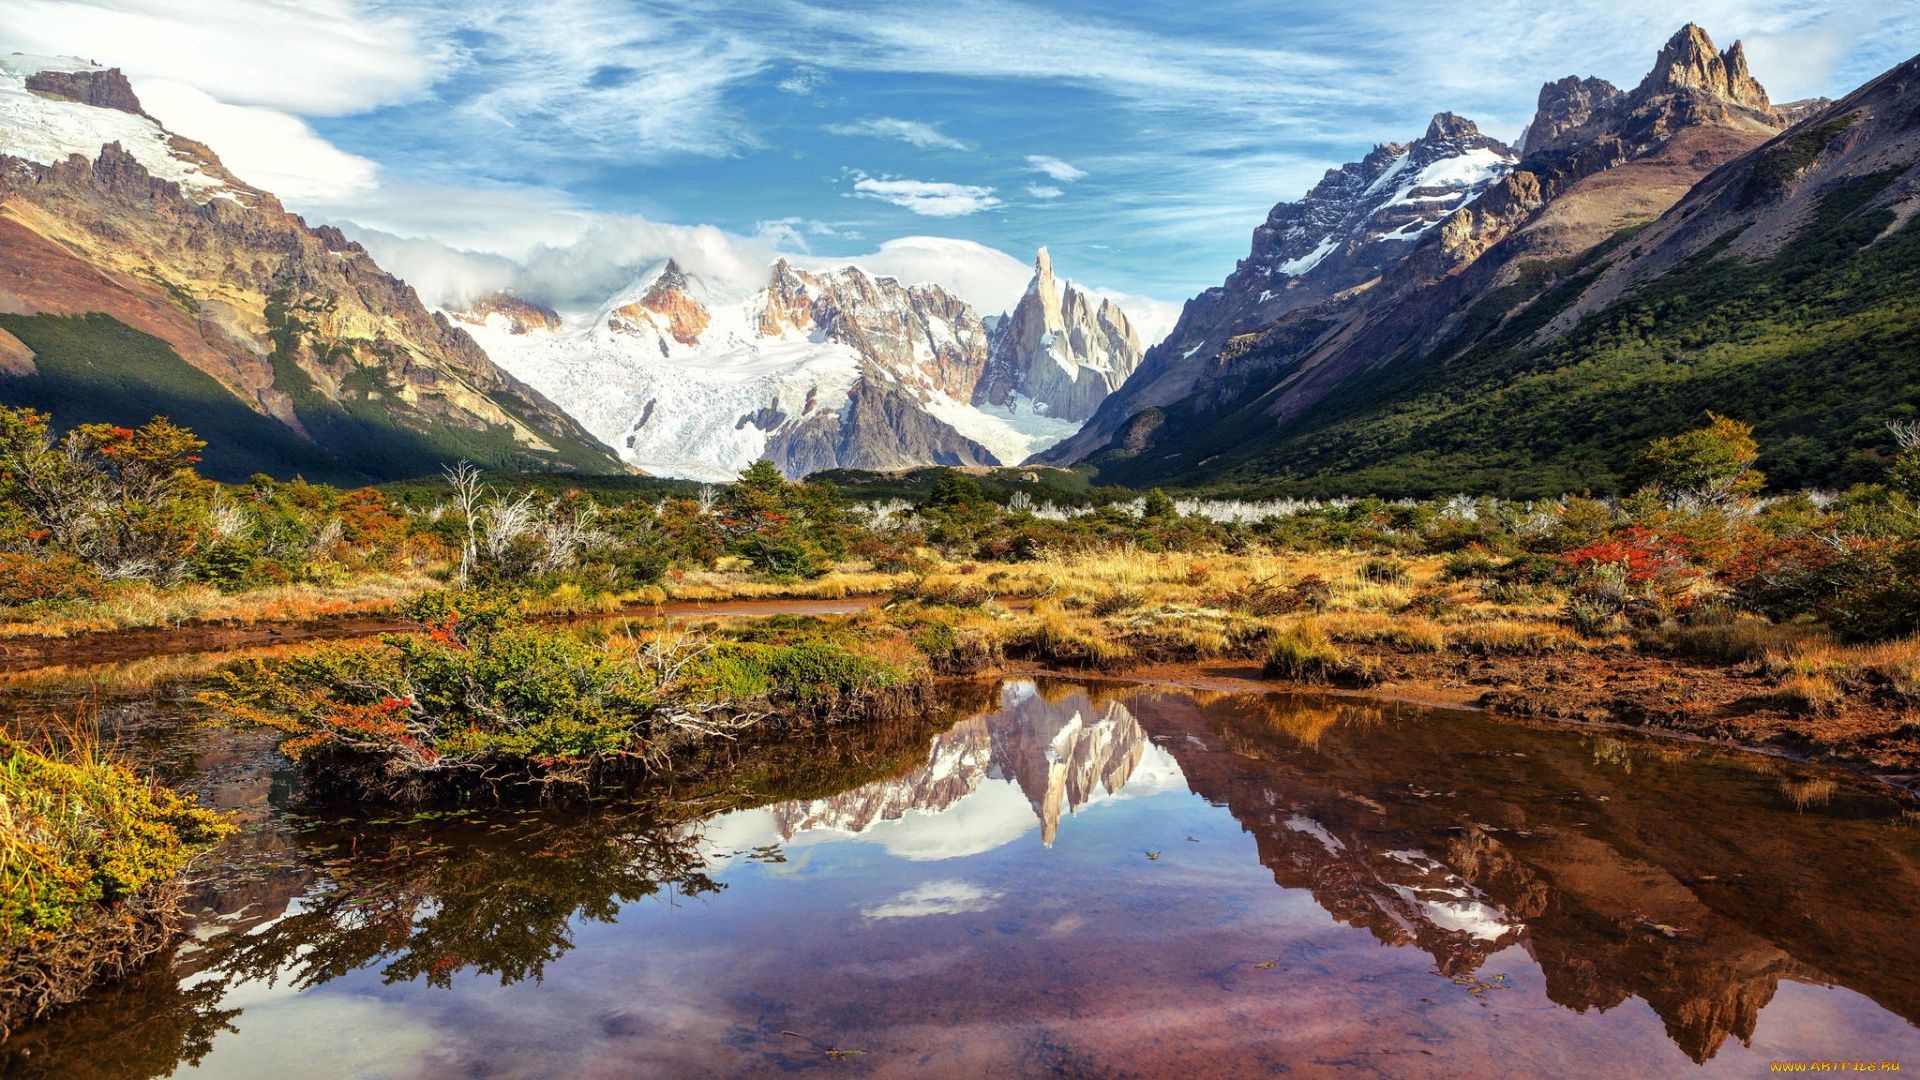 Argentina: The country is bordered by the Drake Passage to the south. 1920x1080 Full HD Wallpaper.